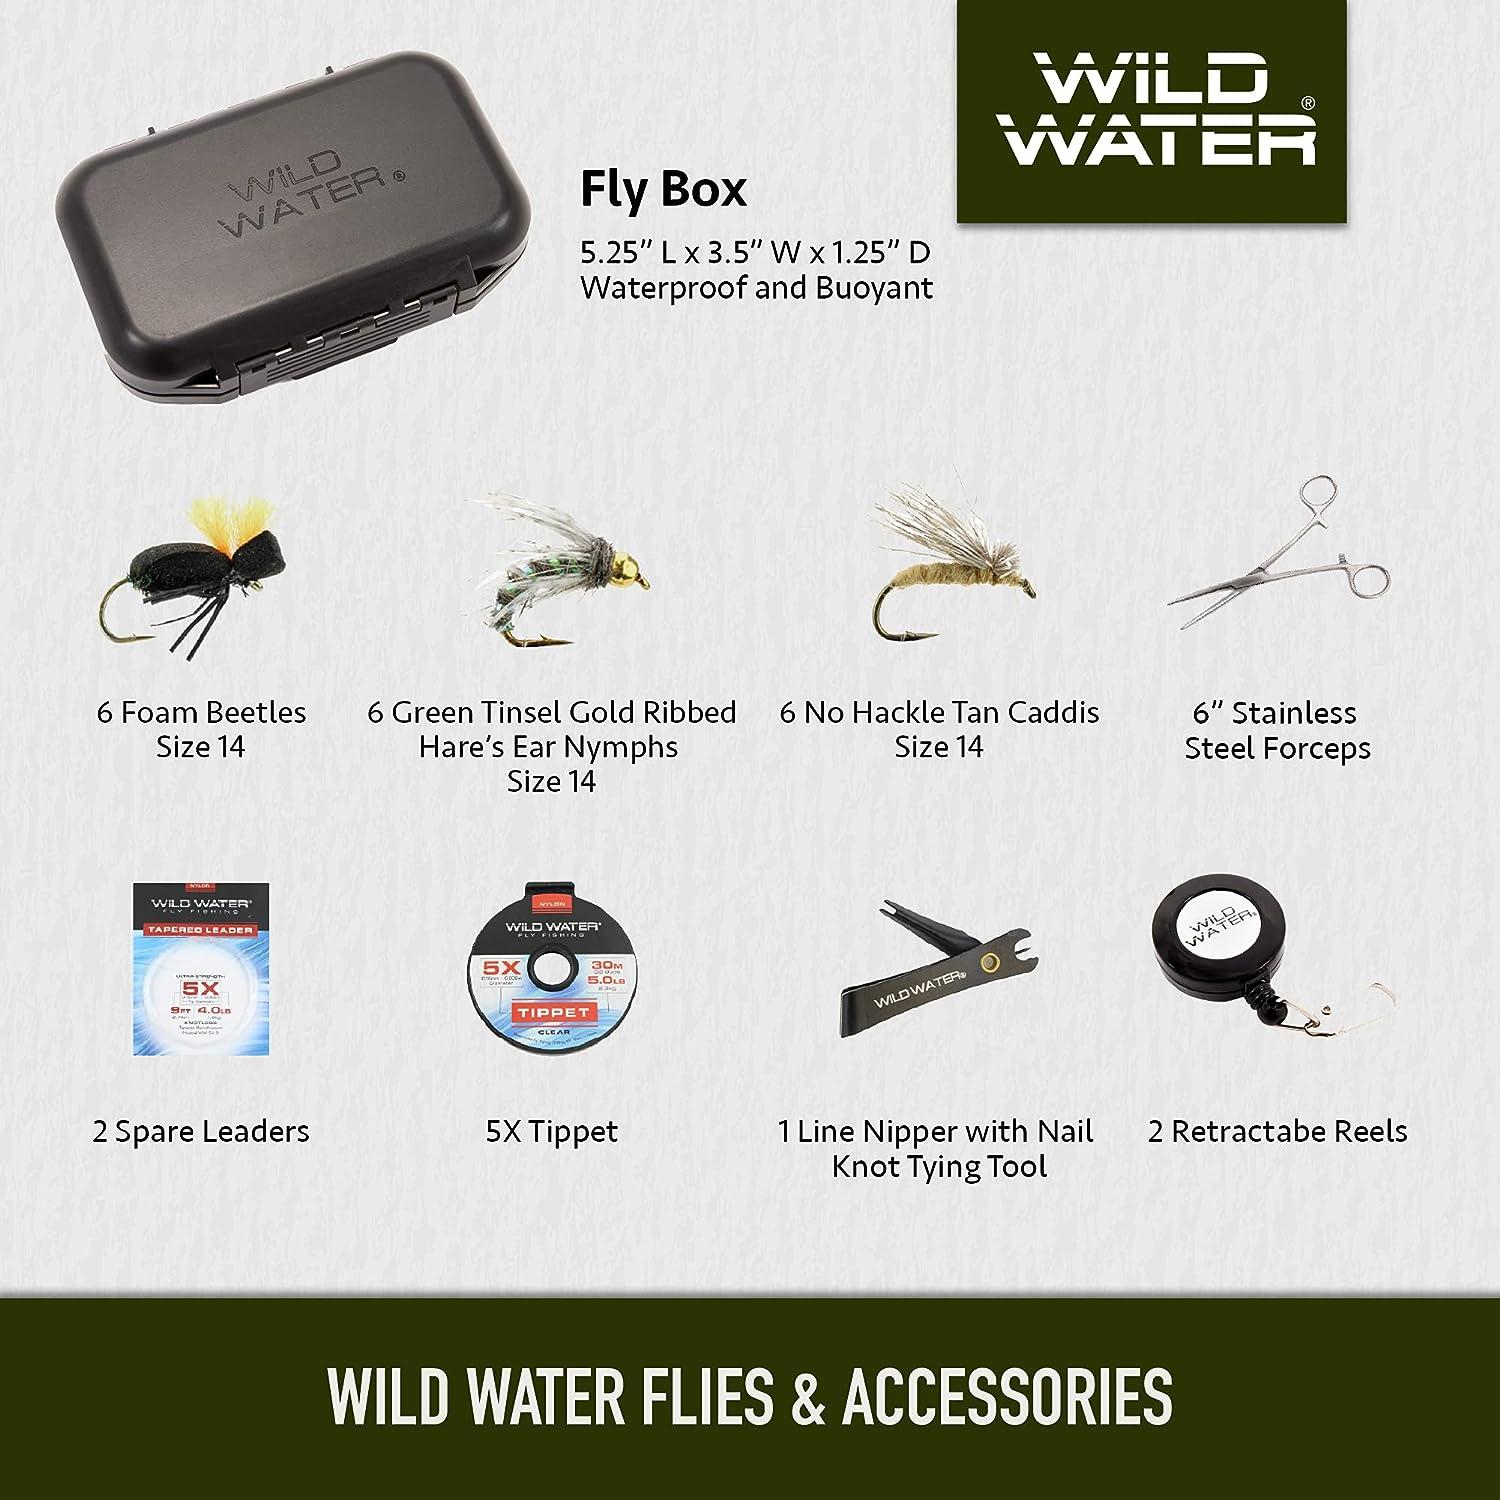 Wild Water Deluxe Fly Fishing Combo Starter Kit, 7-Foot Pole, 4